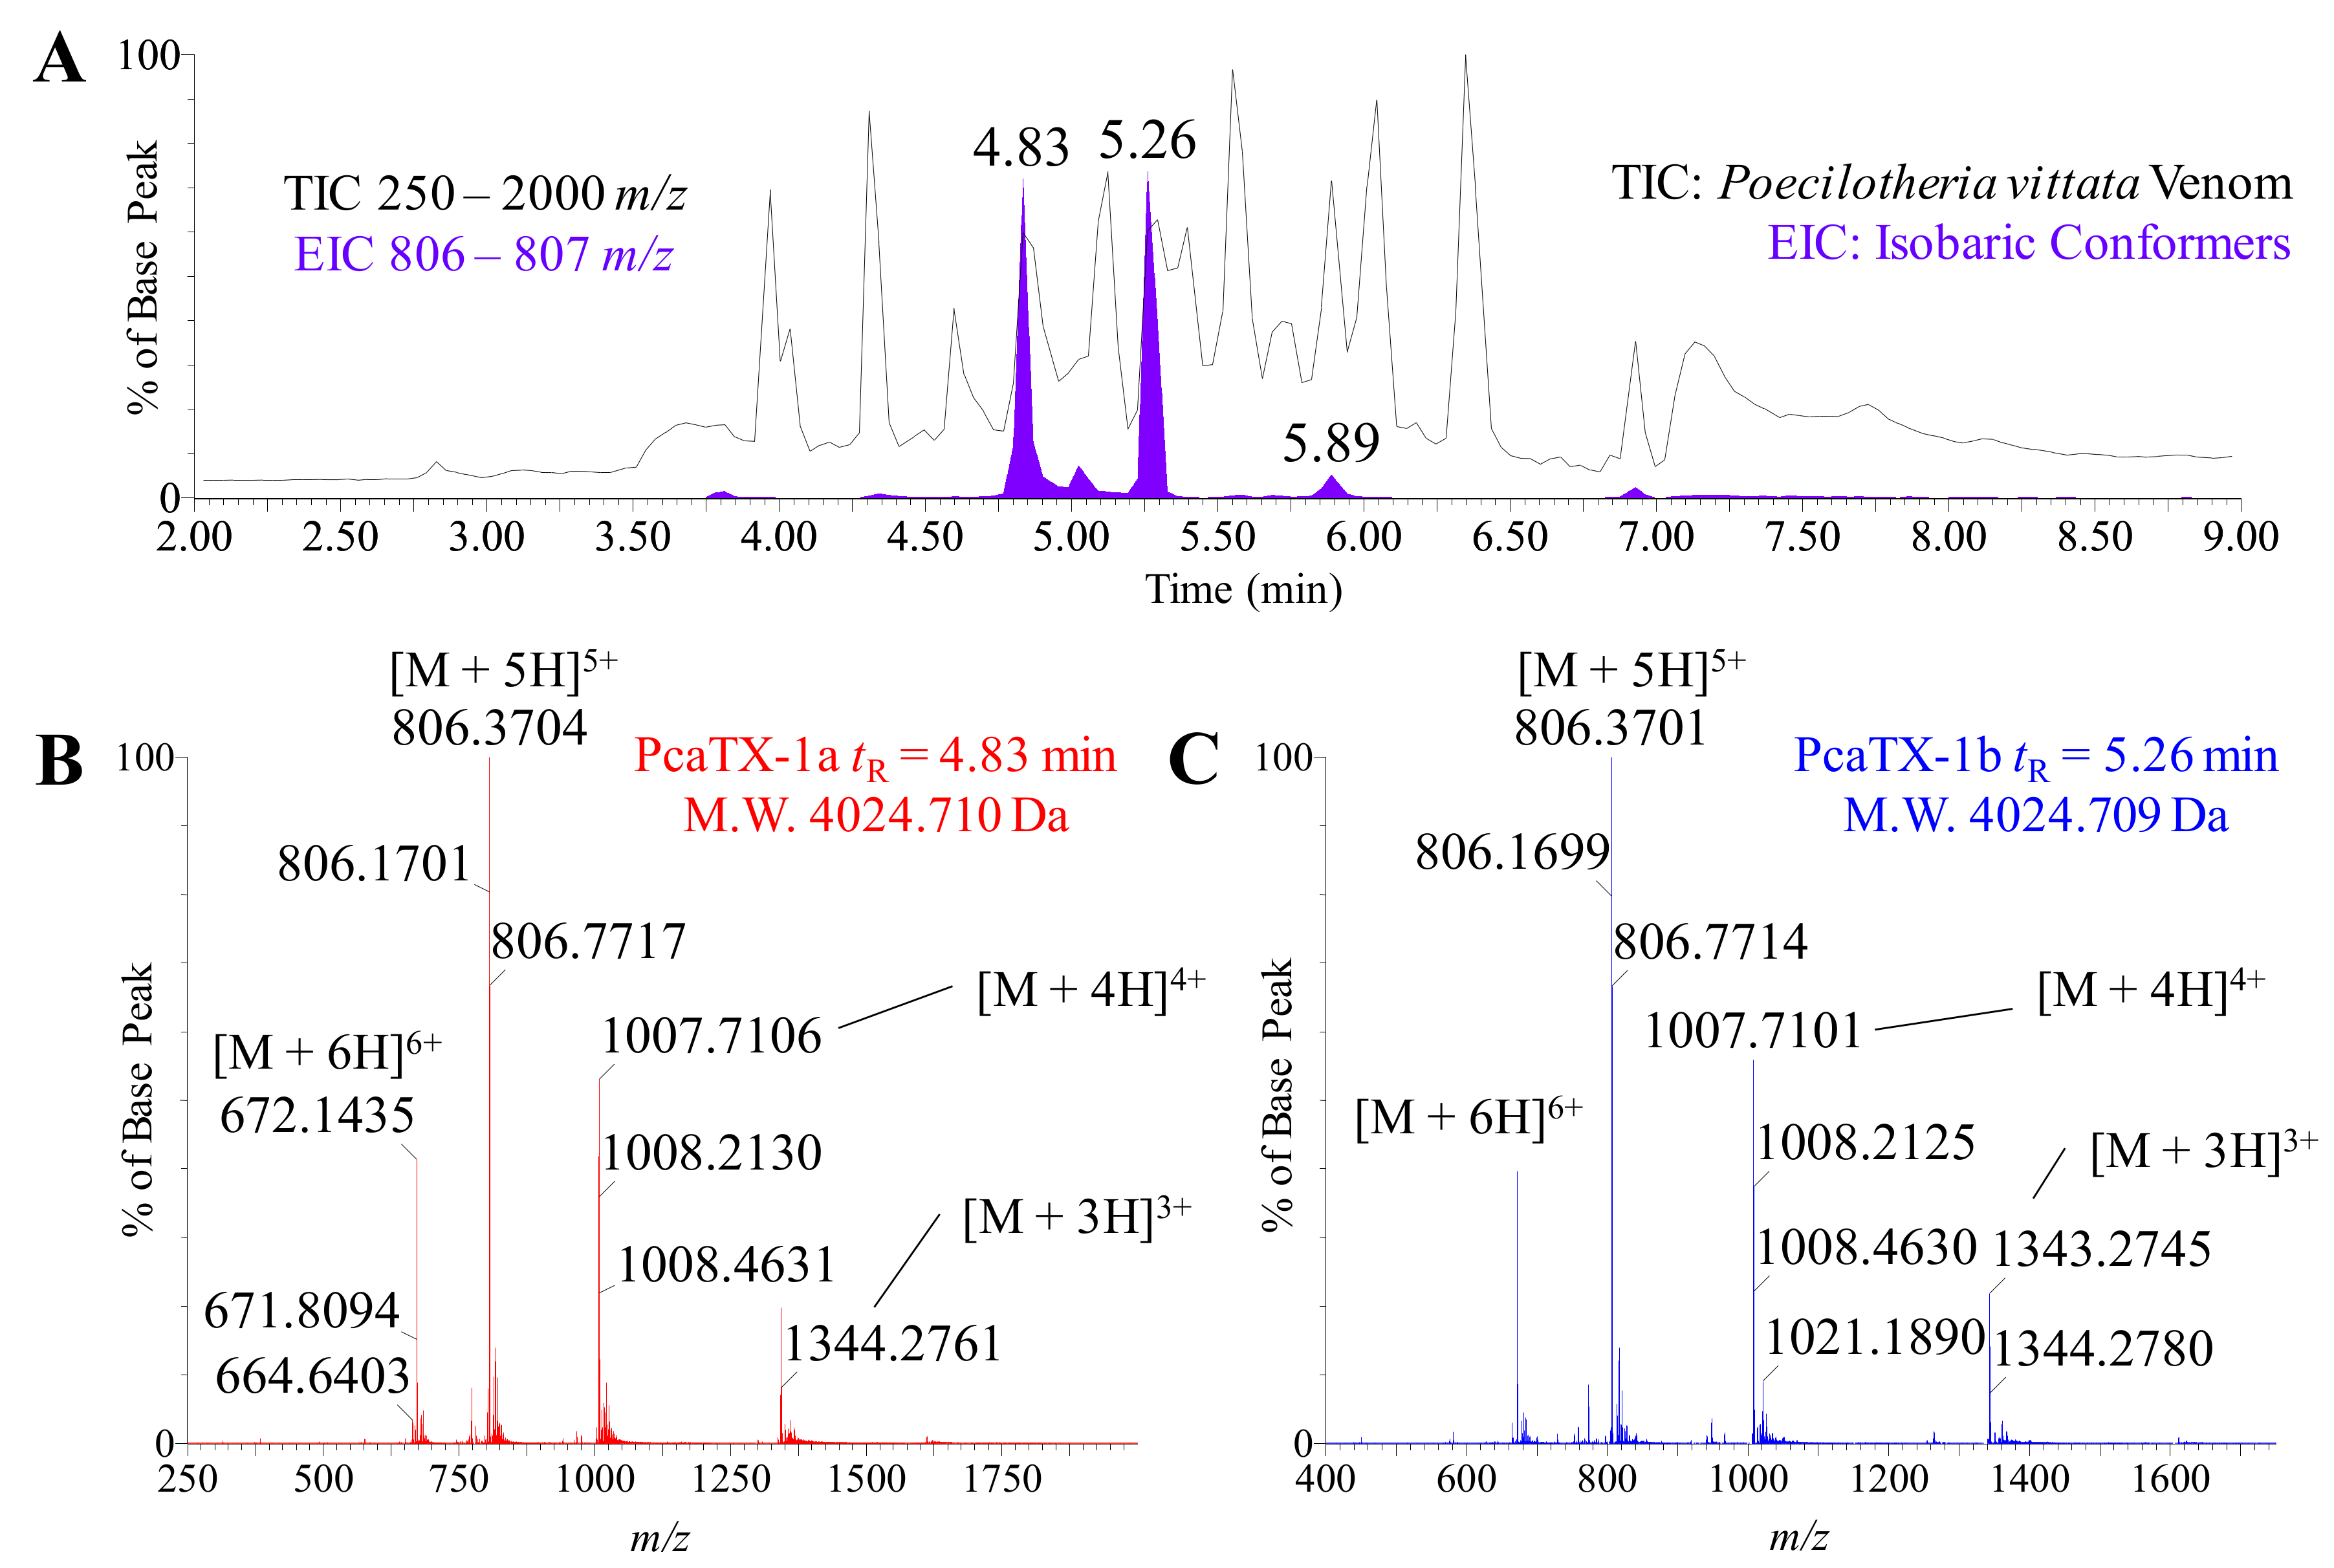 Toxins Free Full Text Aspartic Acid Isomerization Characterized By High Definition Mass Spectrometry Significantly Alters The Bioactivity Of A Novel Toxin From Poecilotheria Html